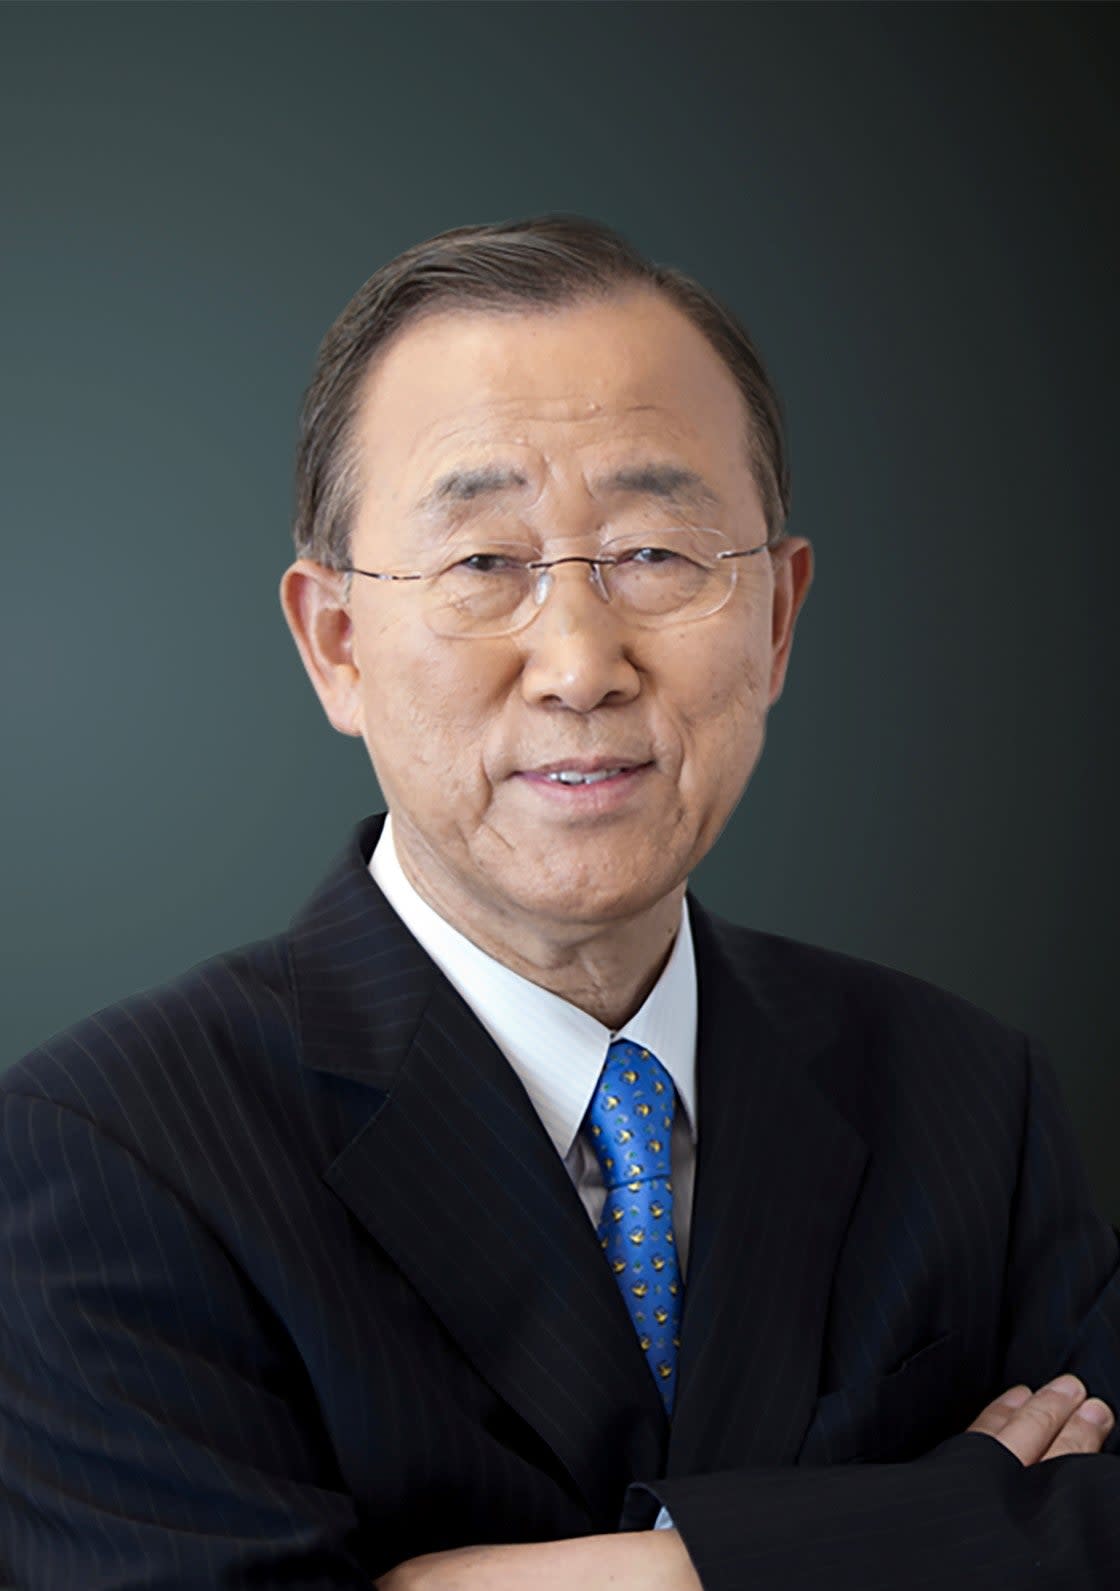 Former secretary-general Ban Ki-moon penned an open letter to world leaders ahead of the White House climate summit (Center for Global Citizens)